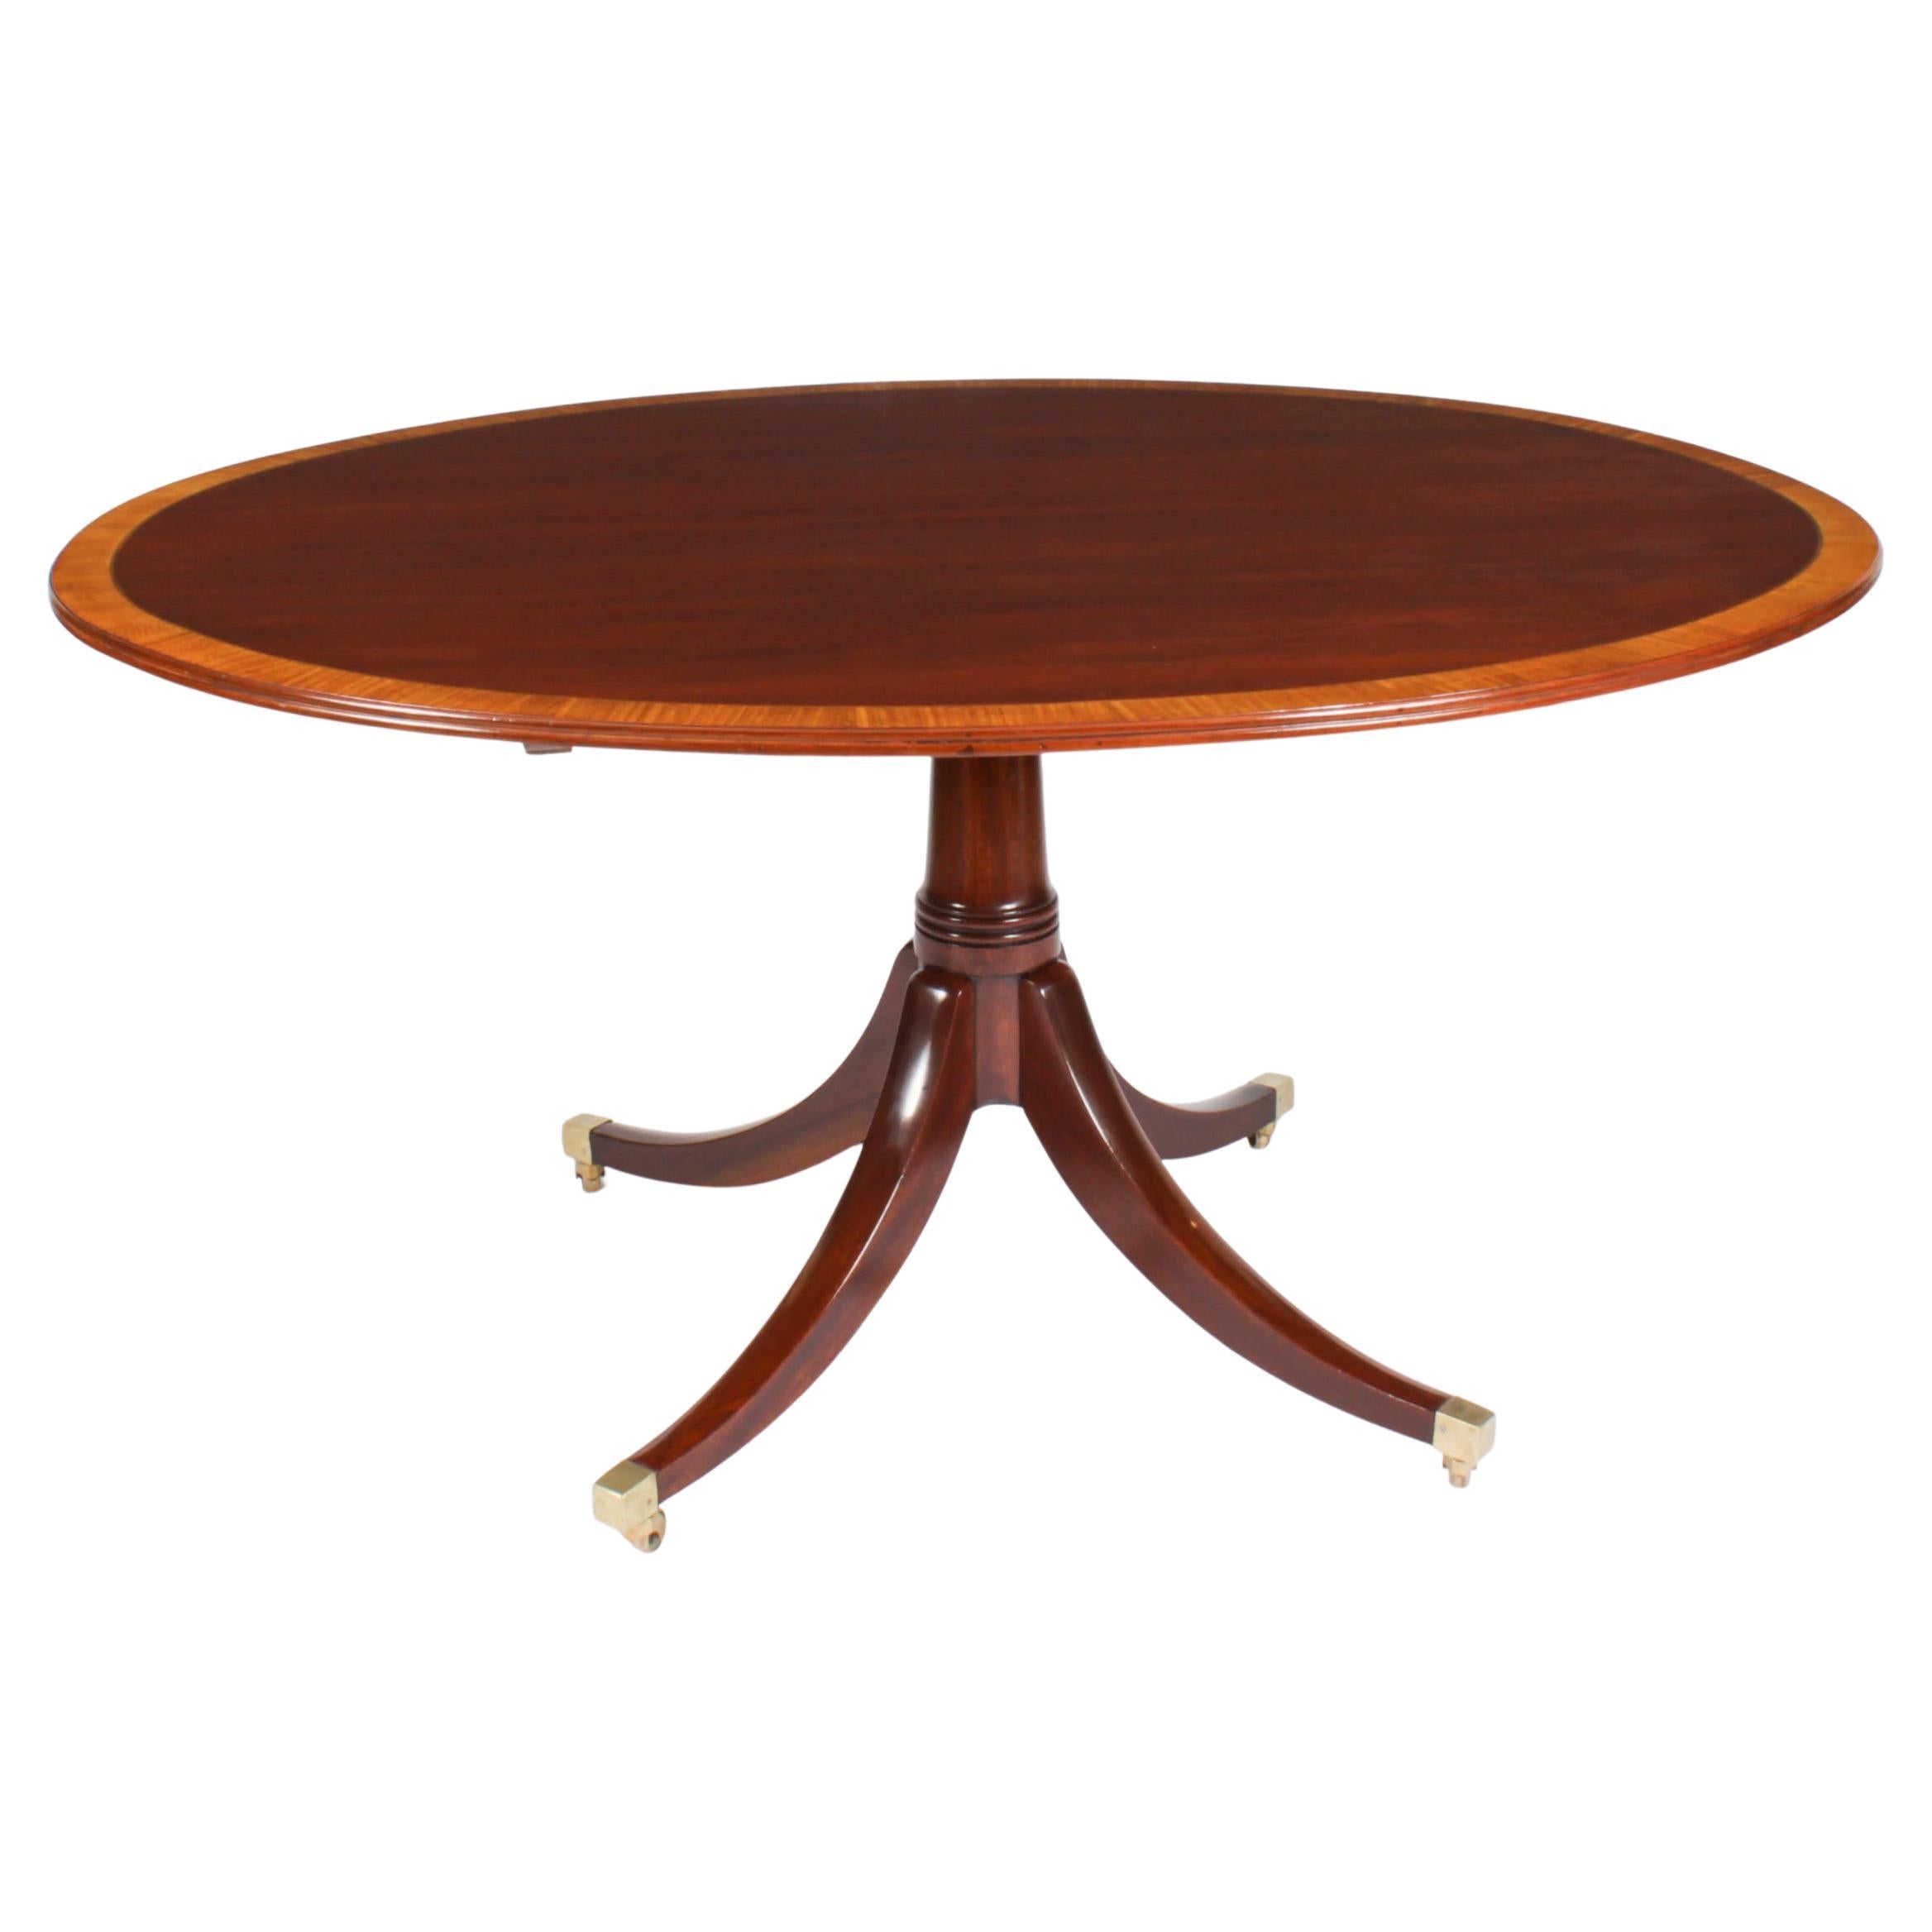 Antique Oval Mahogany Tilt Top Dining Table, Early 20th Century For Sale